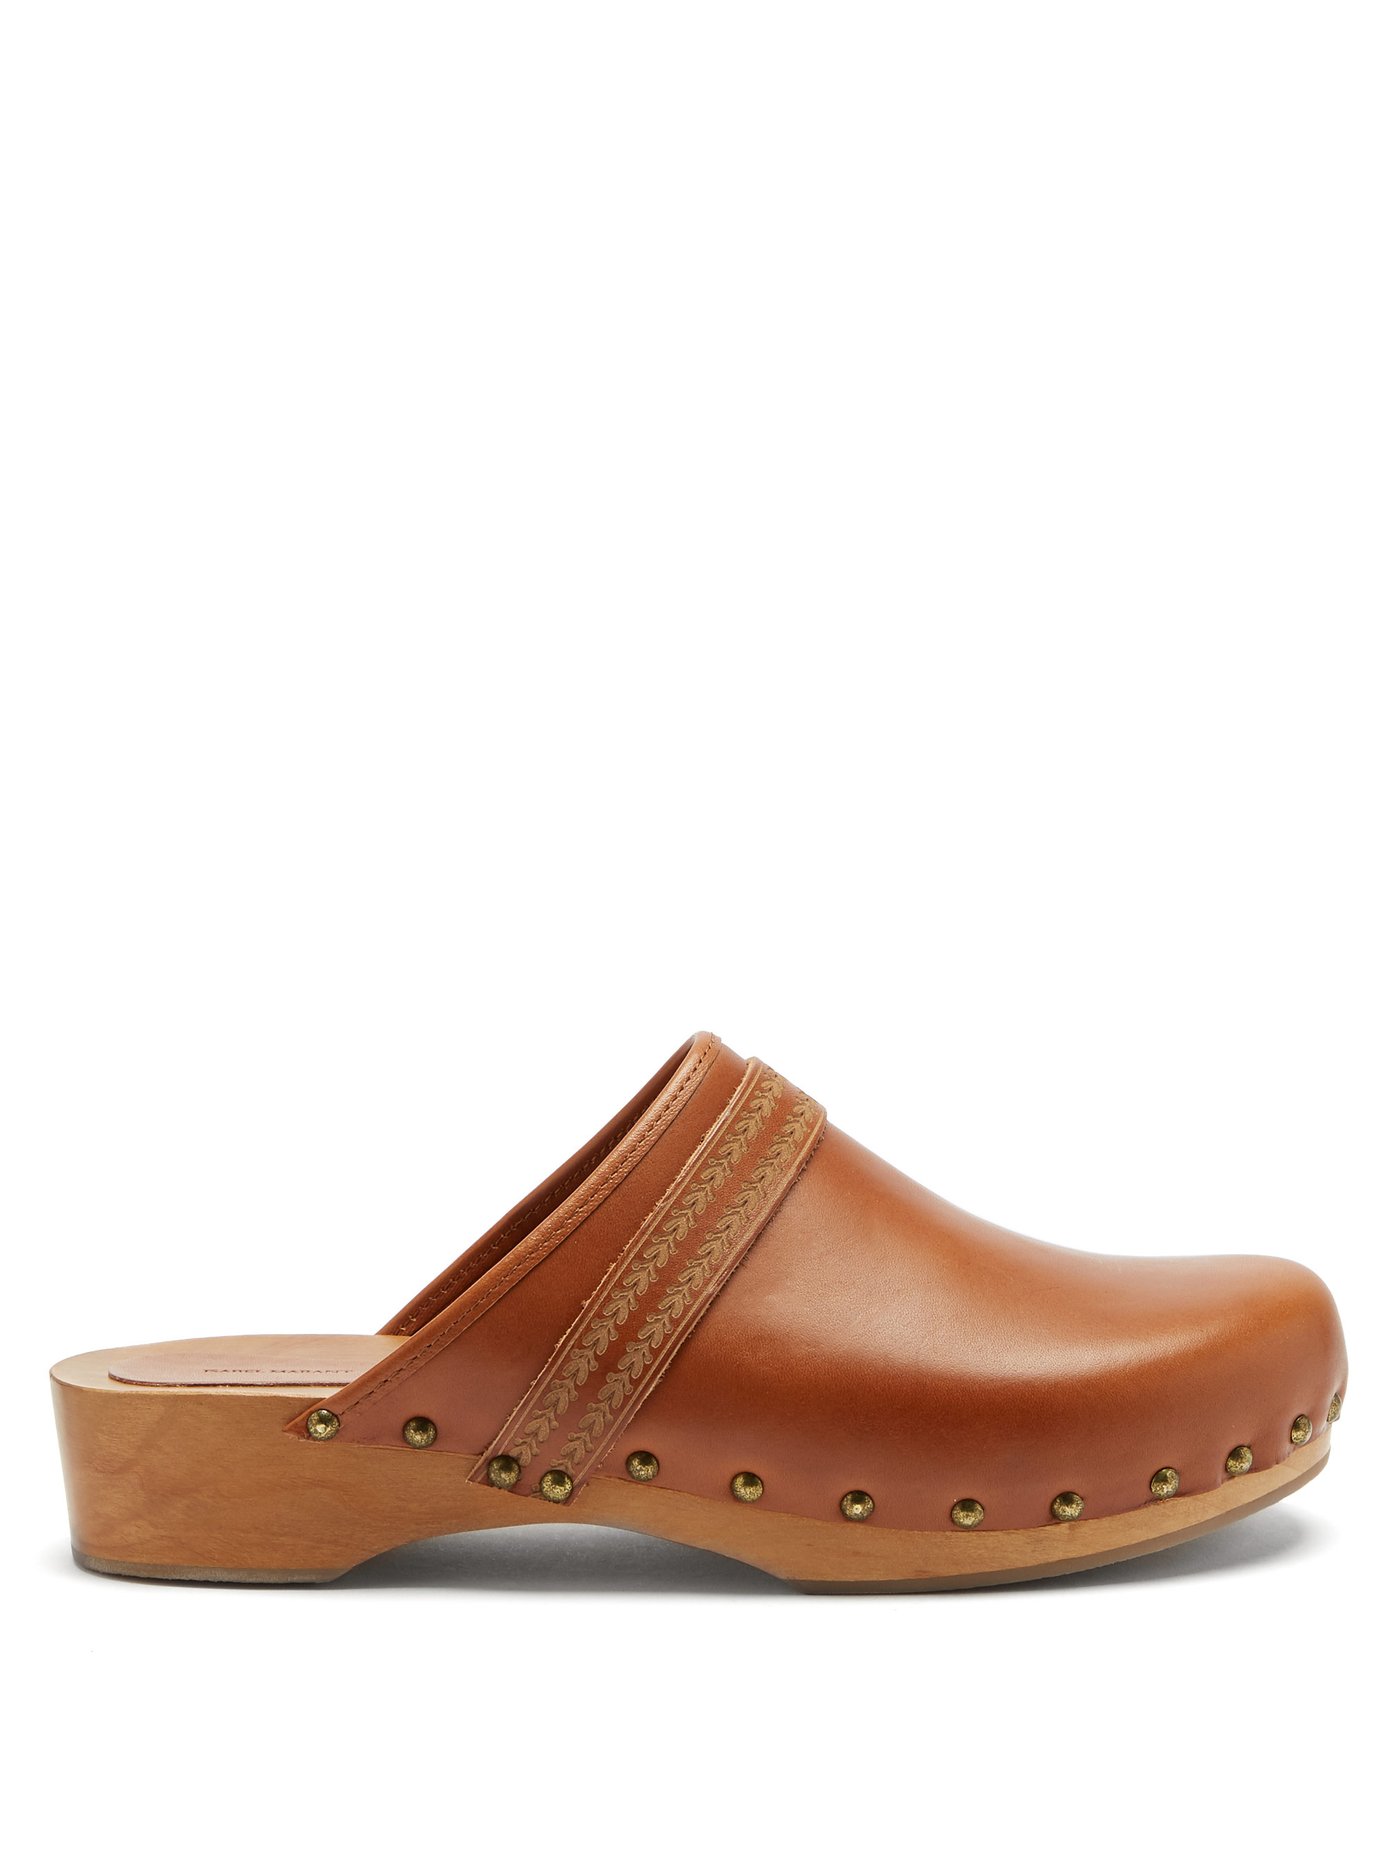 Thalie floral-carved leather clog mules 